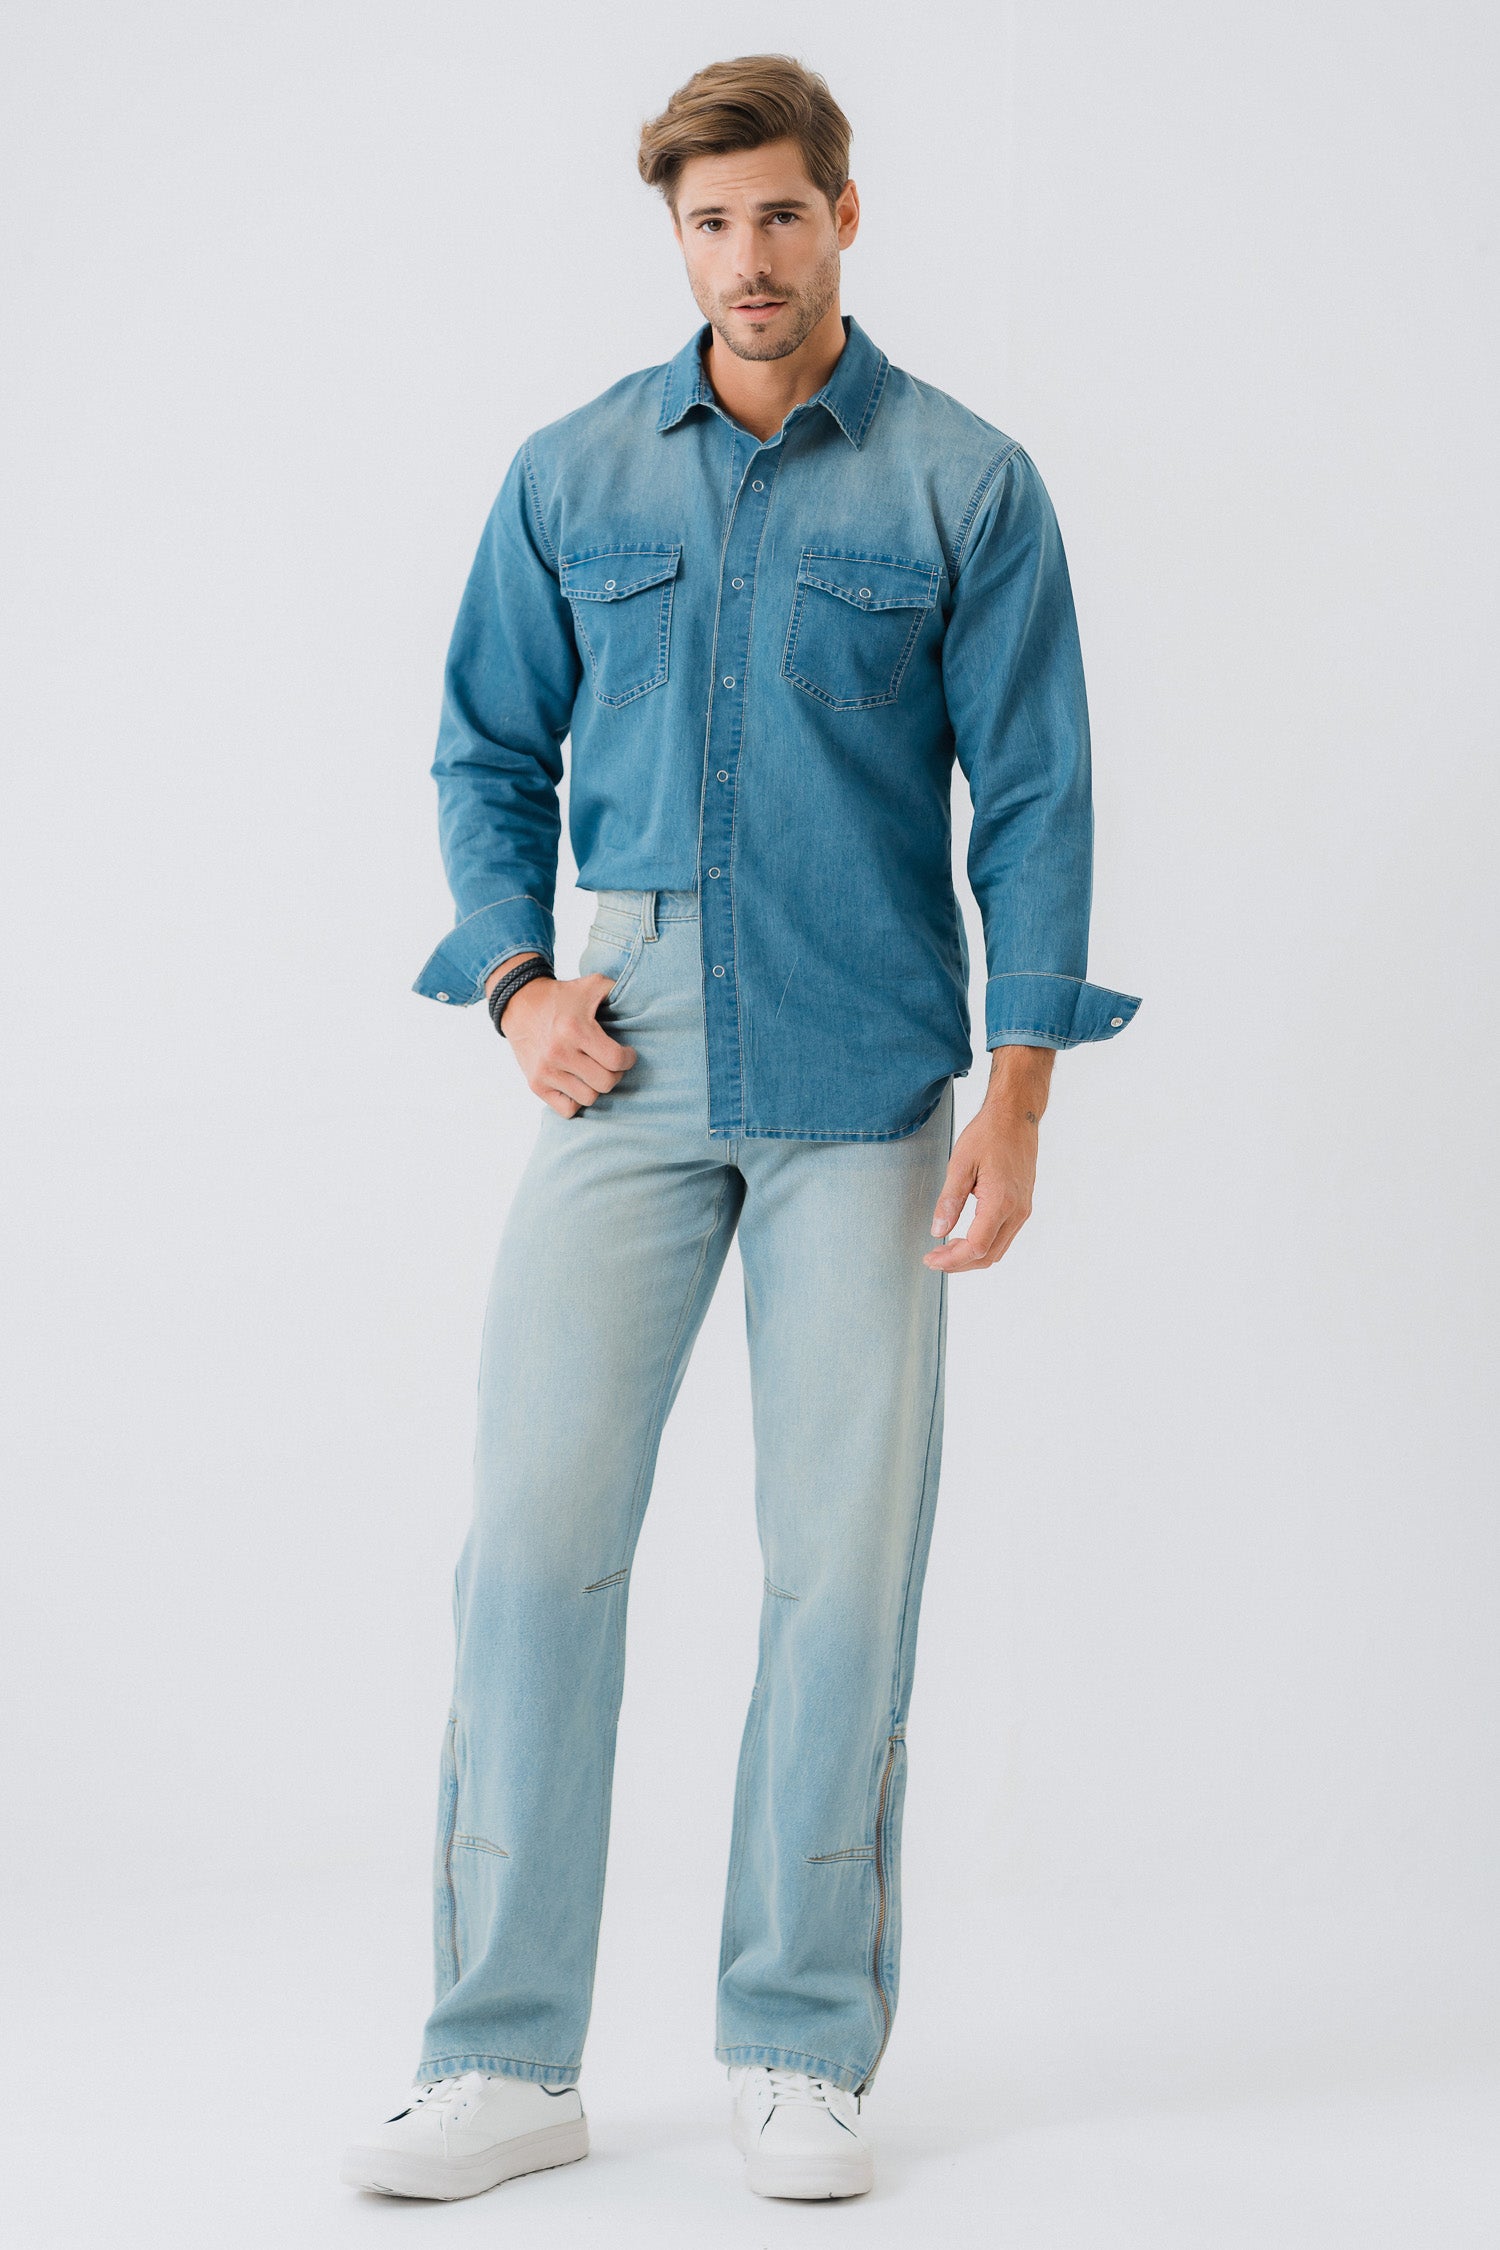 The Blue Grey Denim Jeans - Buy The Blue Grey Denim Jeans online in India